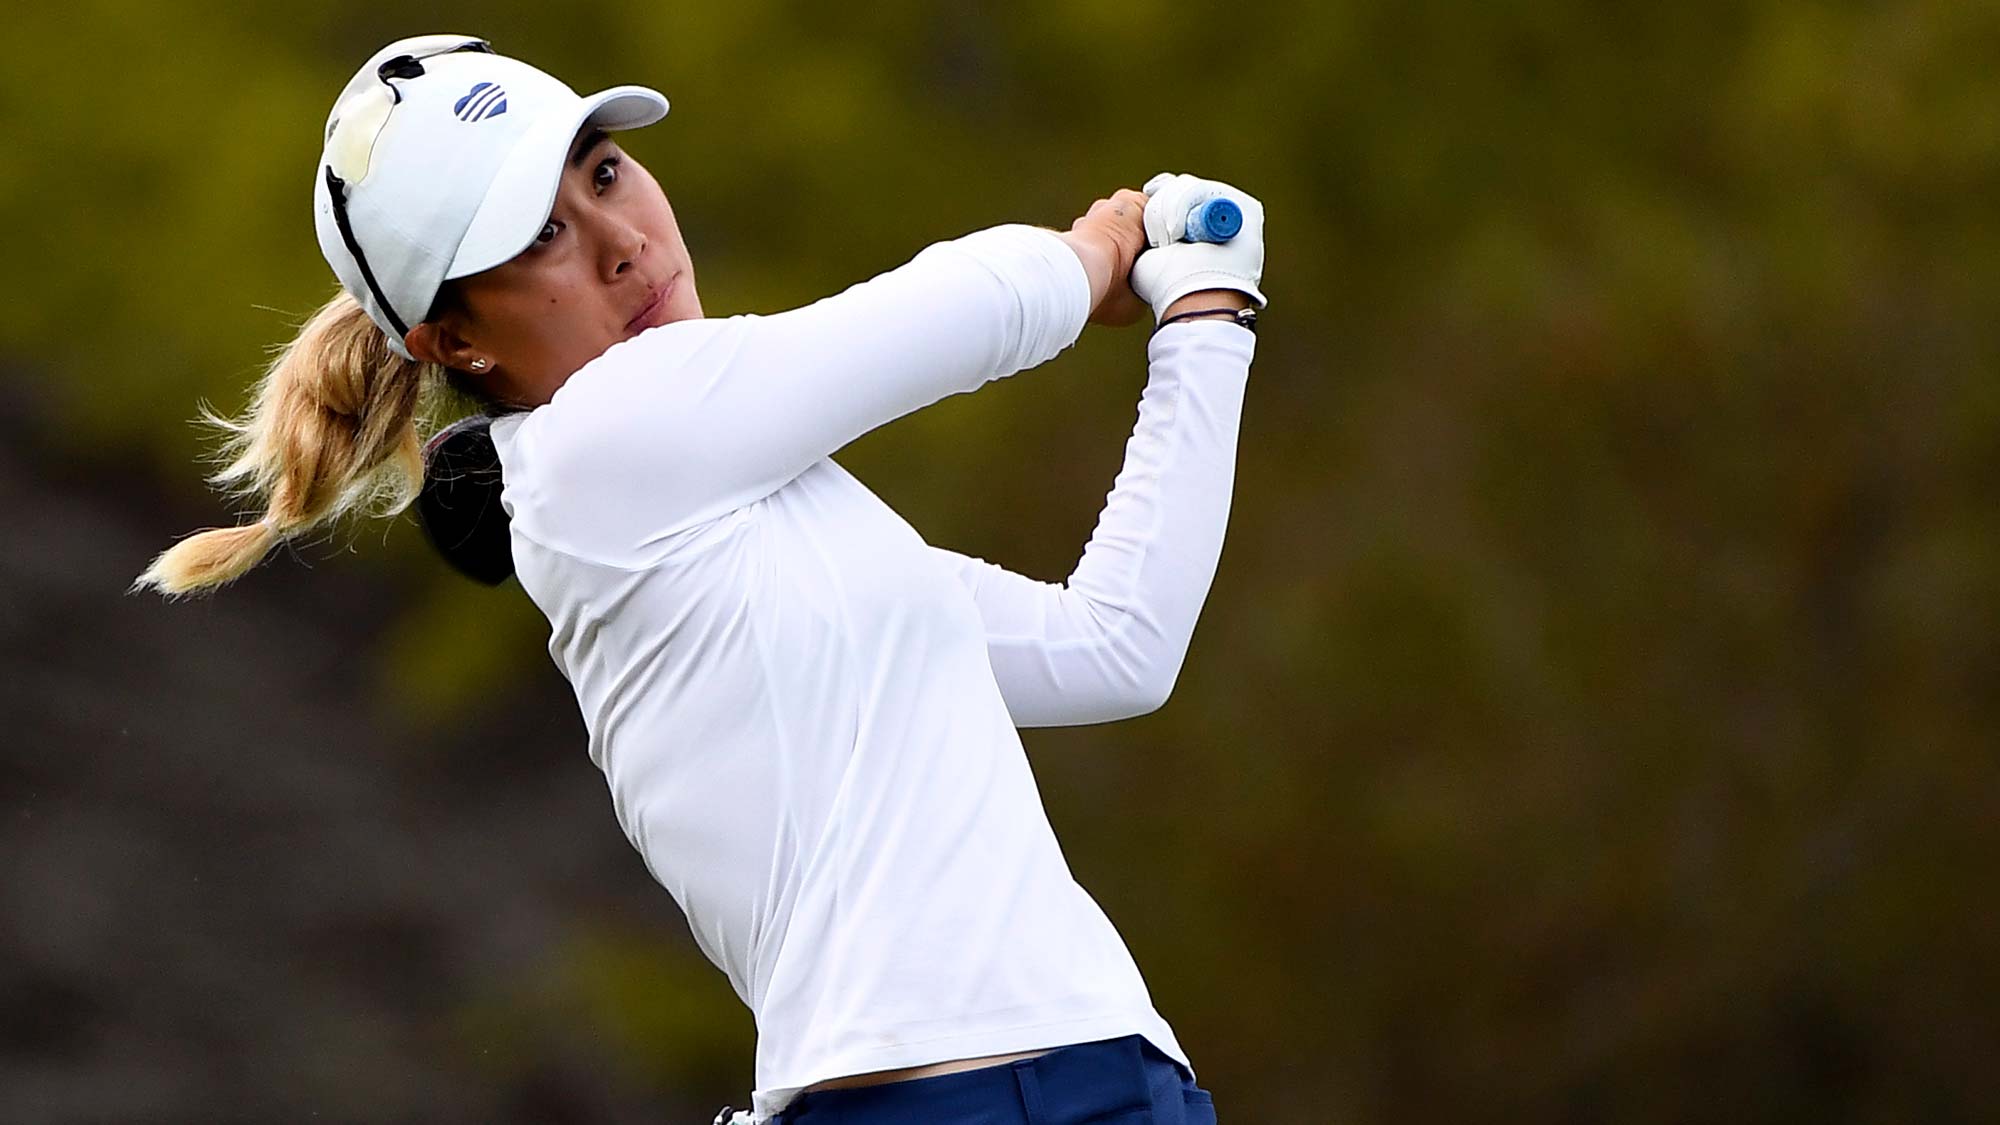 Danielle Kang tees off of the sixth hole during the final round of the 2020 LPGA Drive On Championship - Reynolds Lake Oconee